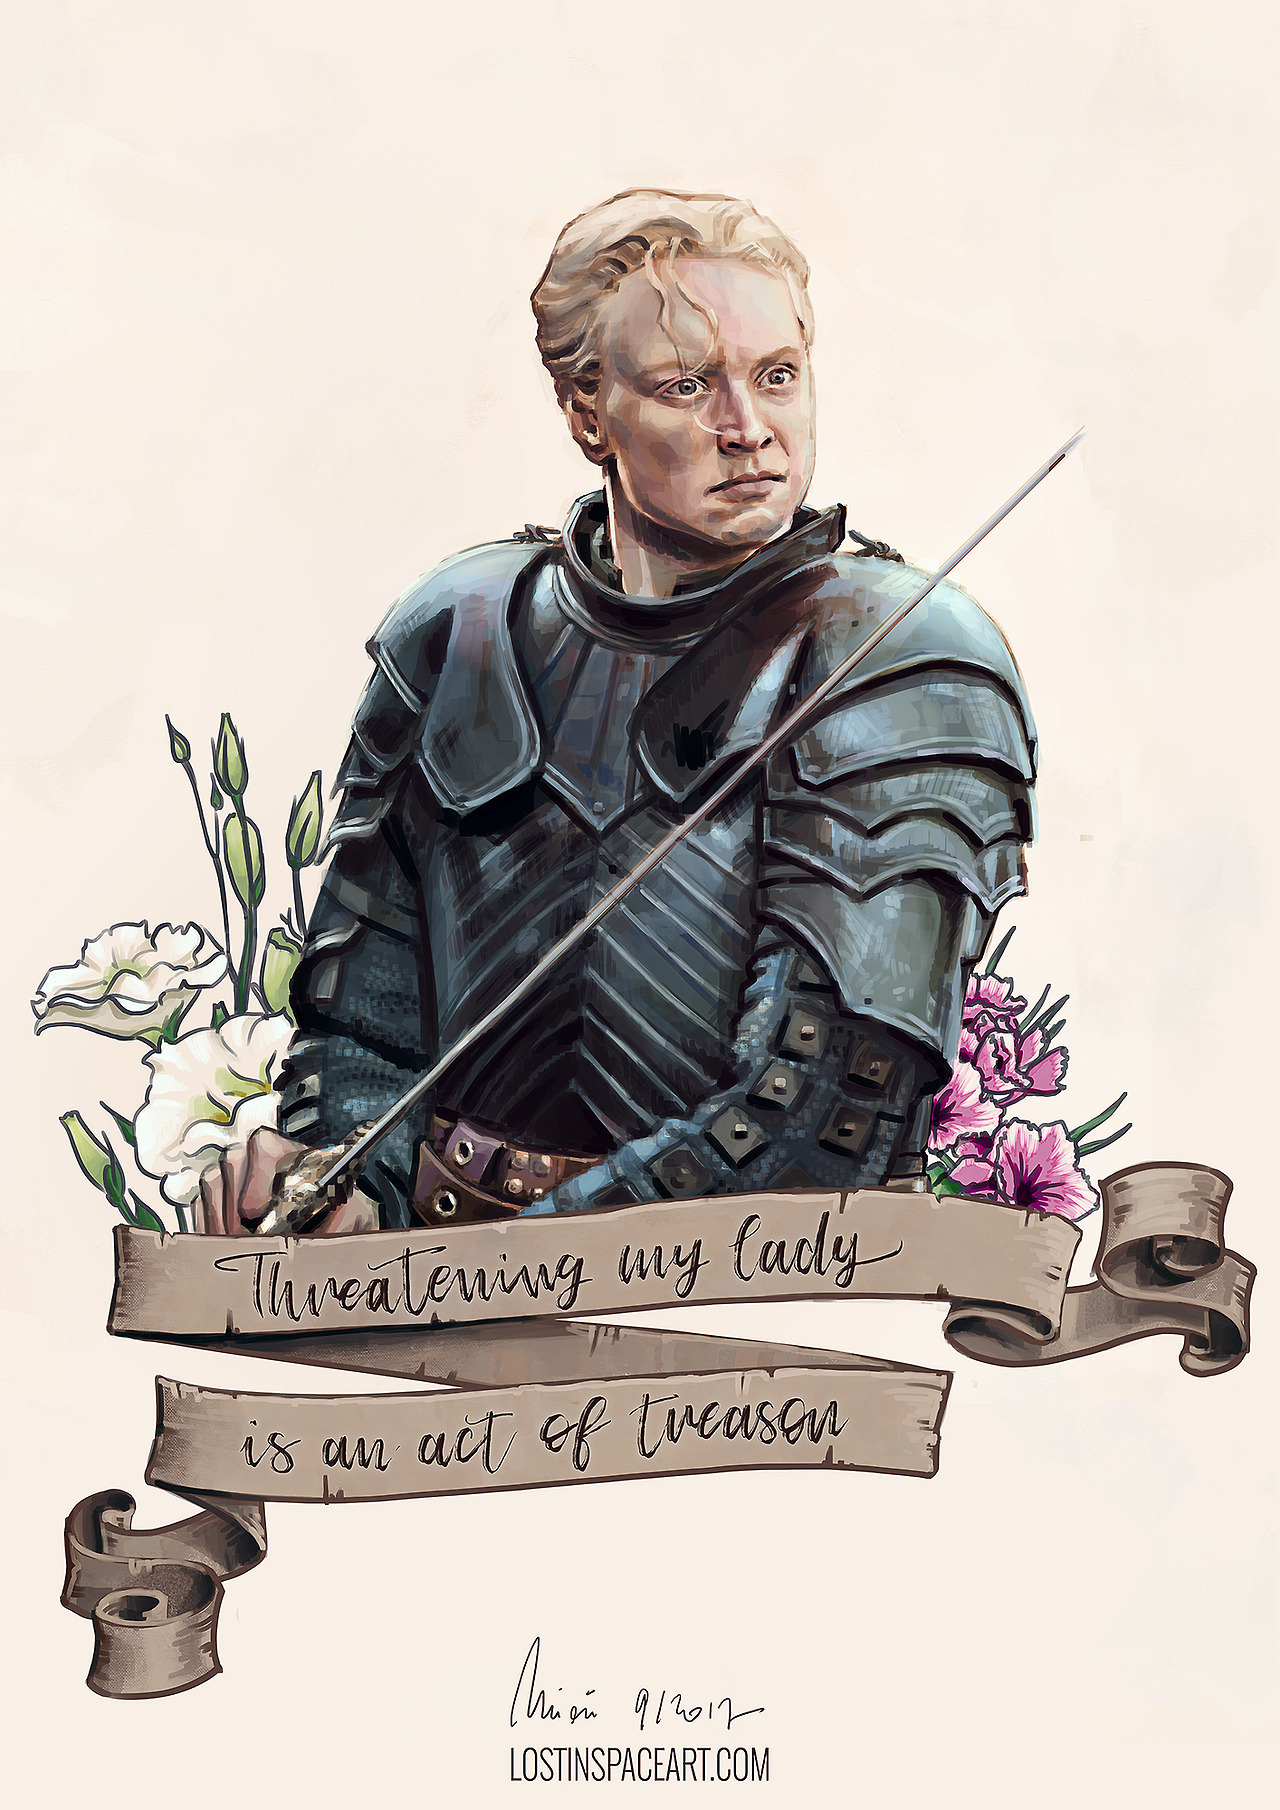 I love Brienne. Uhm… — Immediately post your art to a topic and get feedback. Join our new community, EatSleepDraw Studio, today!